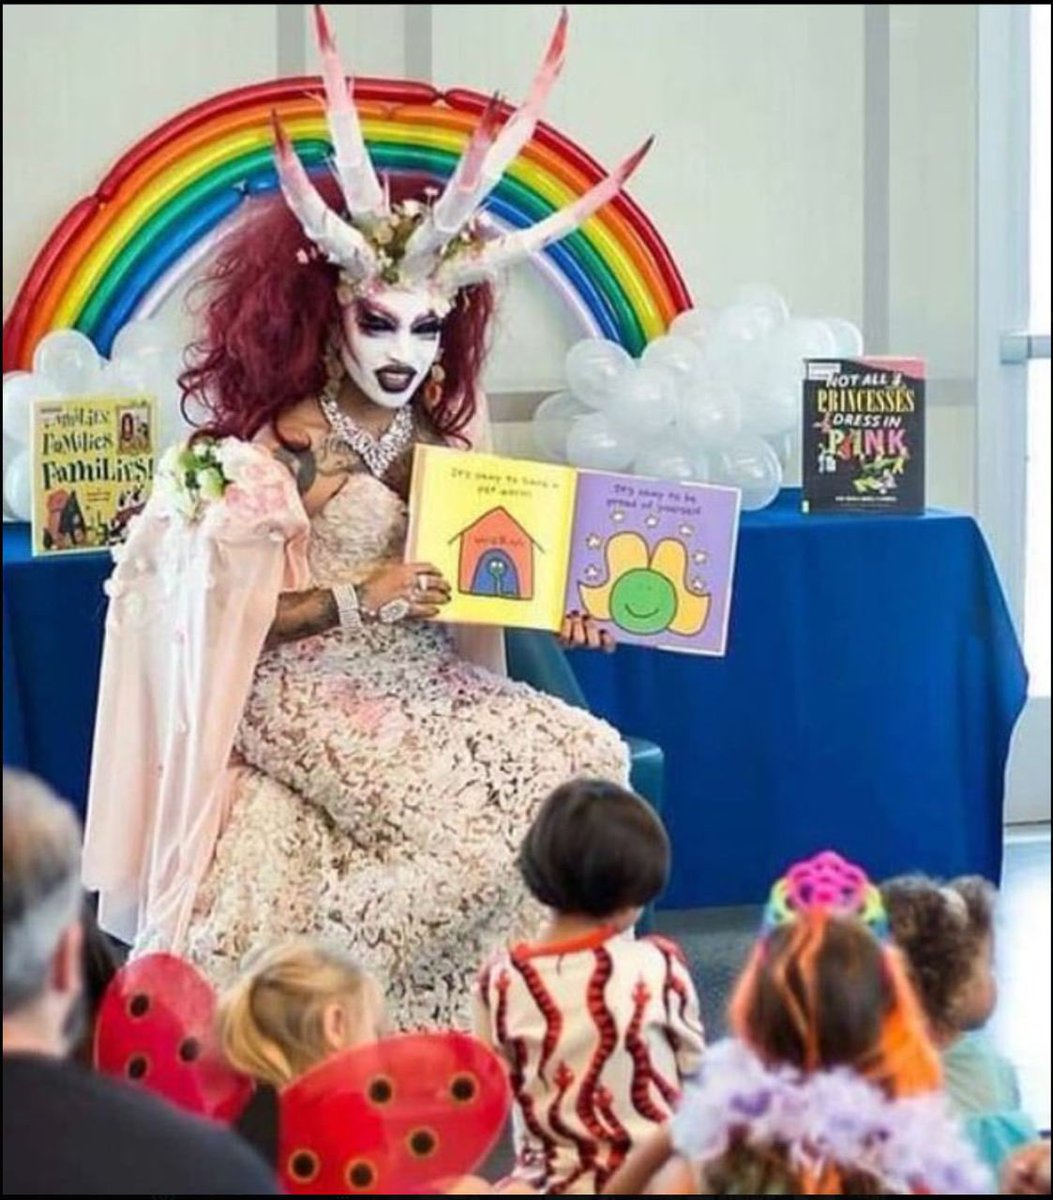 Consider this your weekly reminder that drag is NOT for kids. Our community did not fight tooth and nail decades previously just to see perverted-deranged lunatics attempt to indoctrinate children into adult themes their little brains can’t possibly comprehend. This isn’t up…